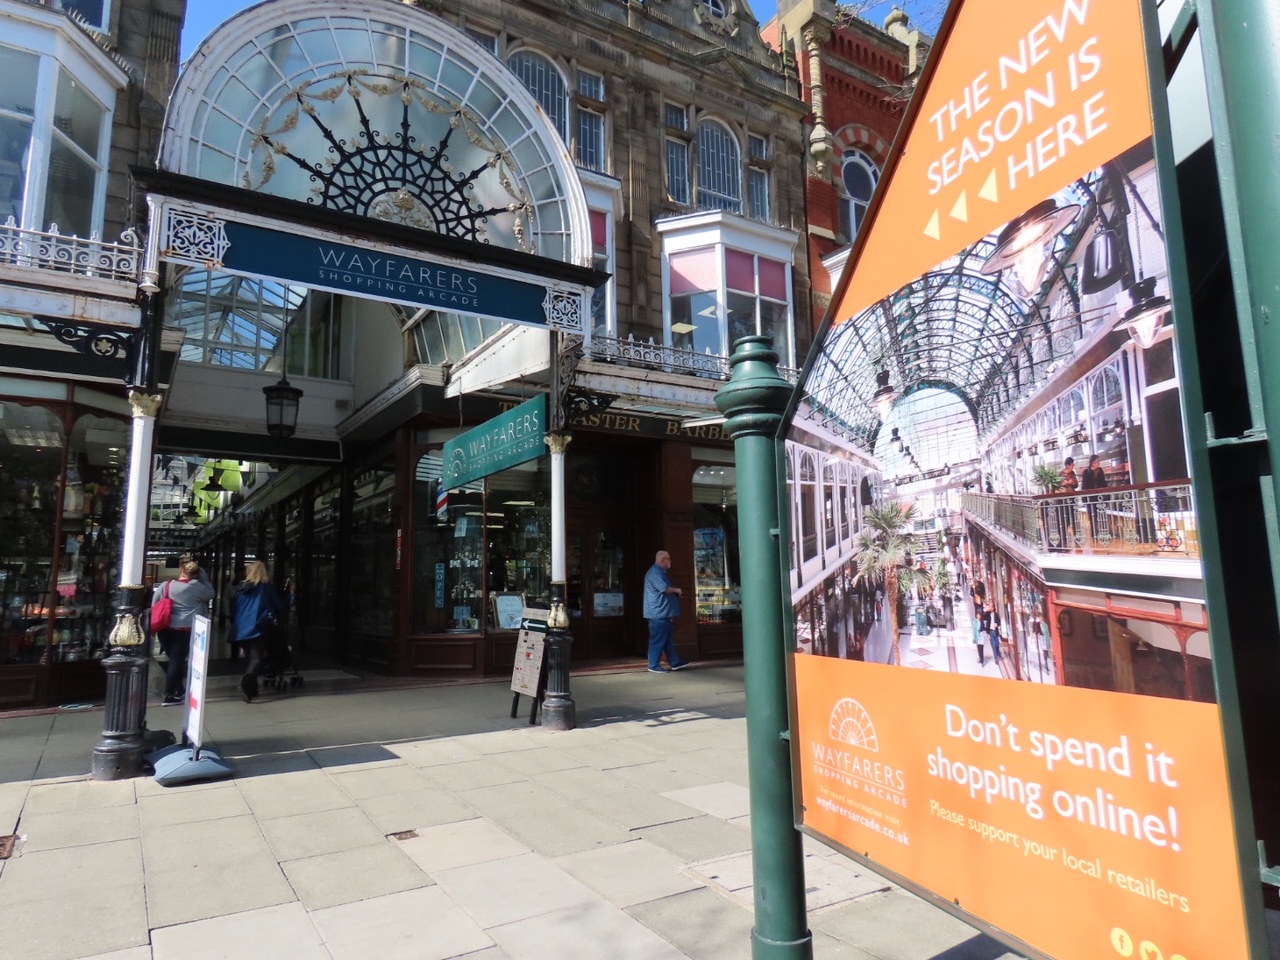 Wayfarers Arcade on Lord Street in Southport. Photo by Andrew Brown Media